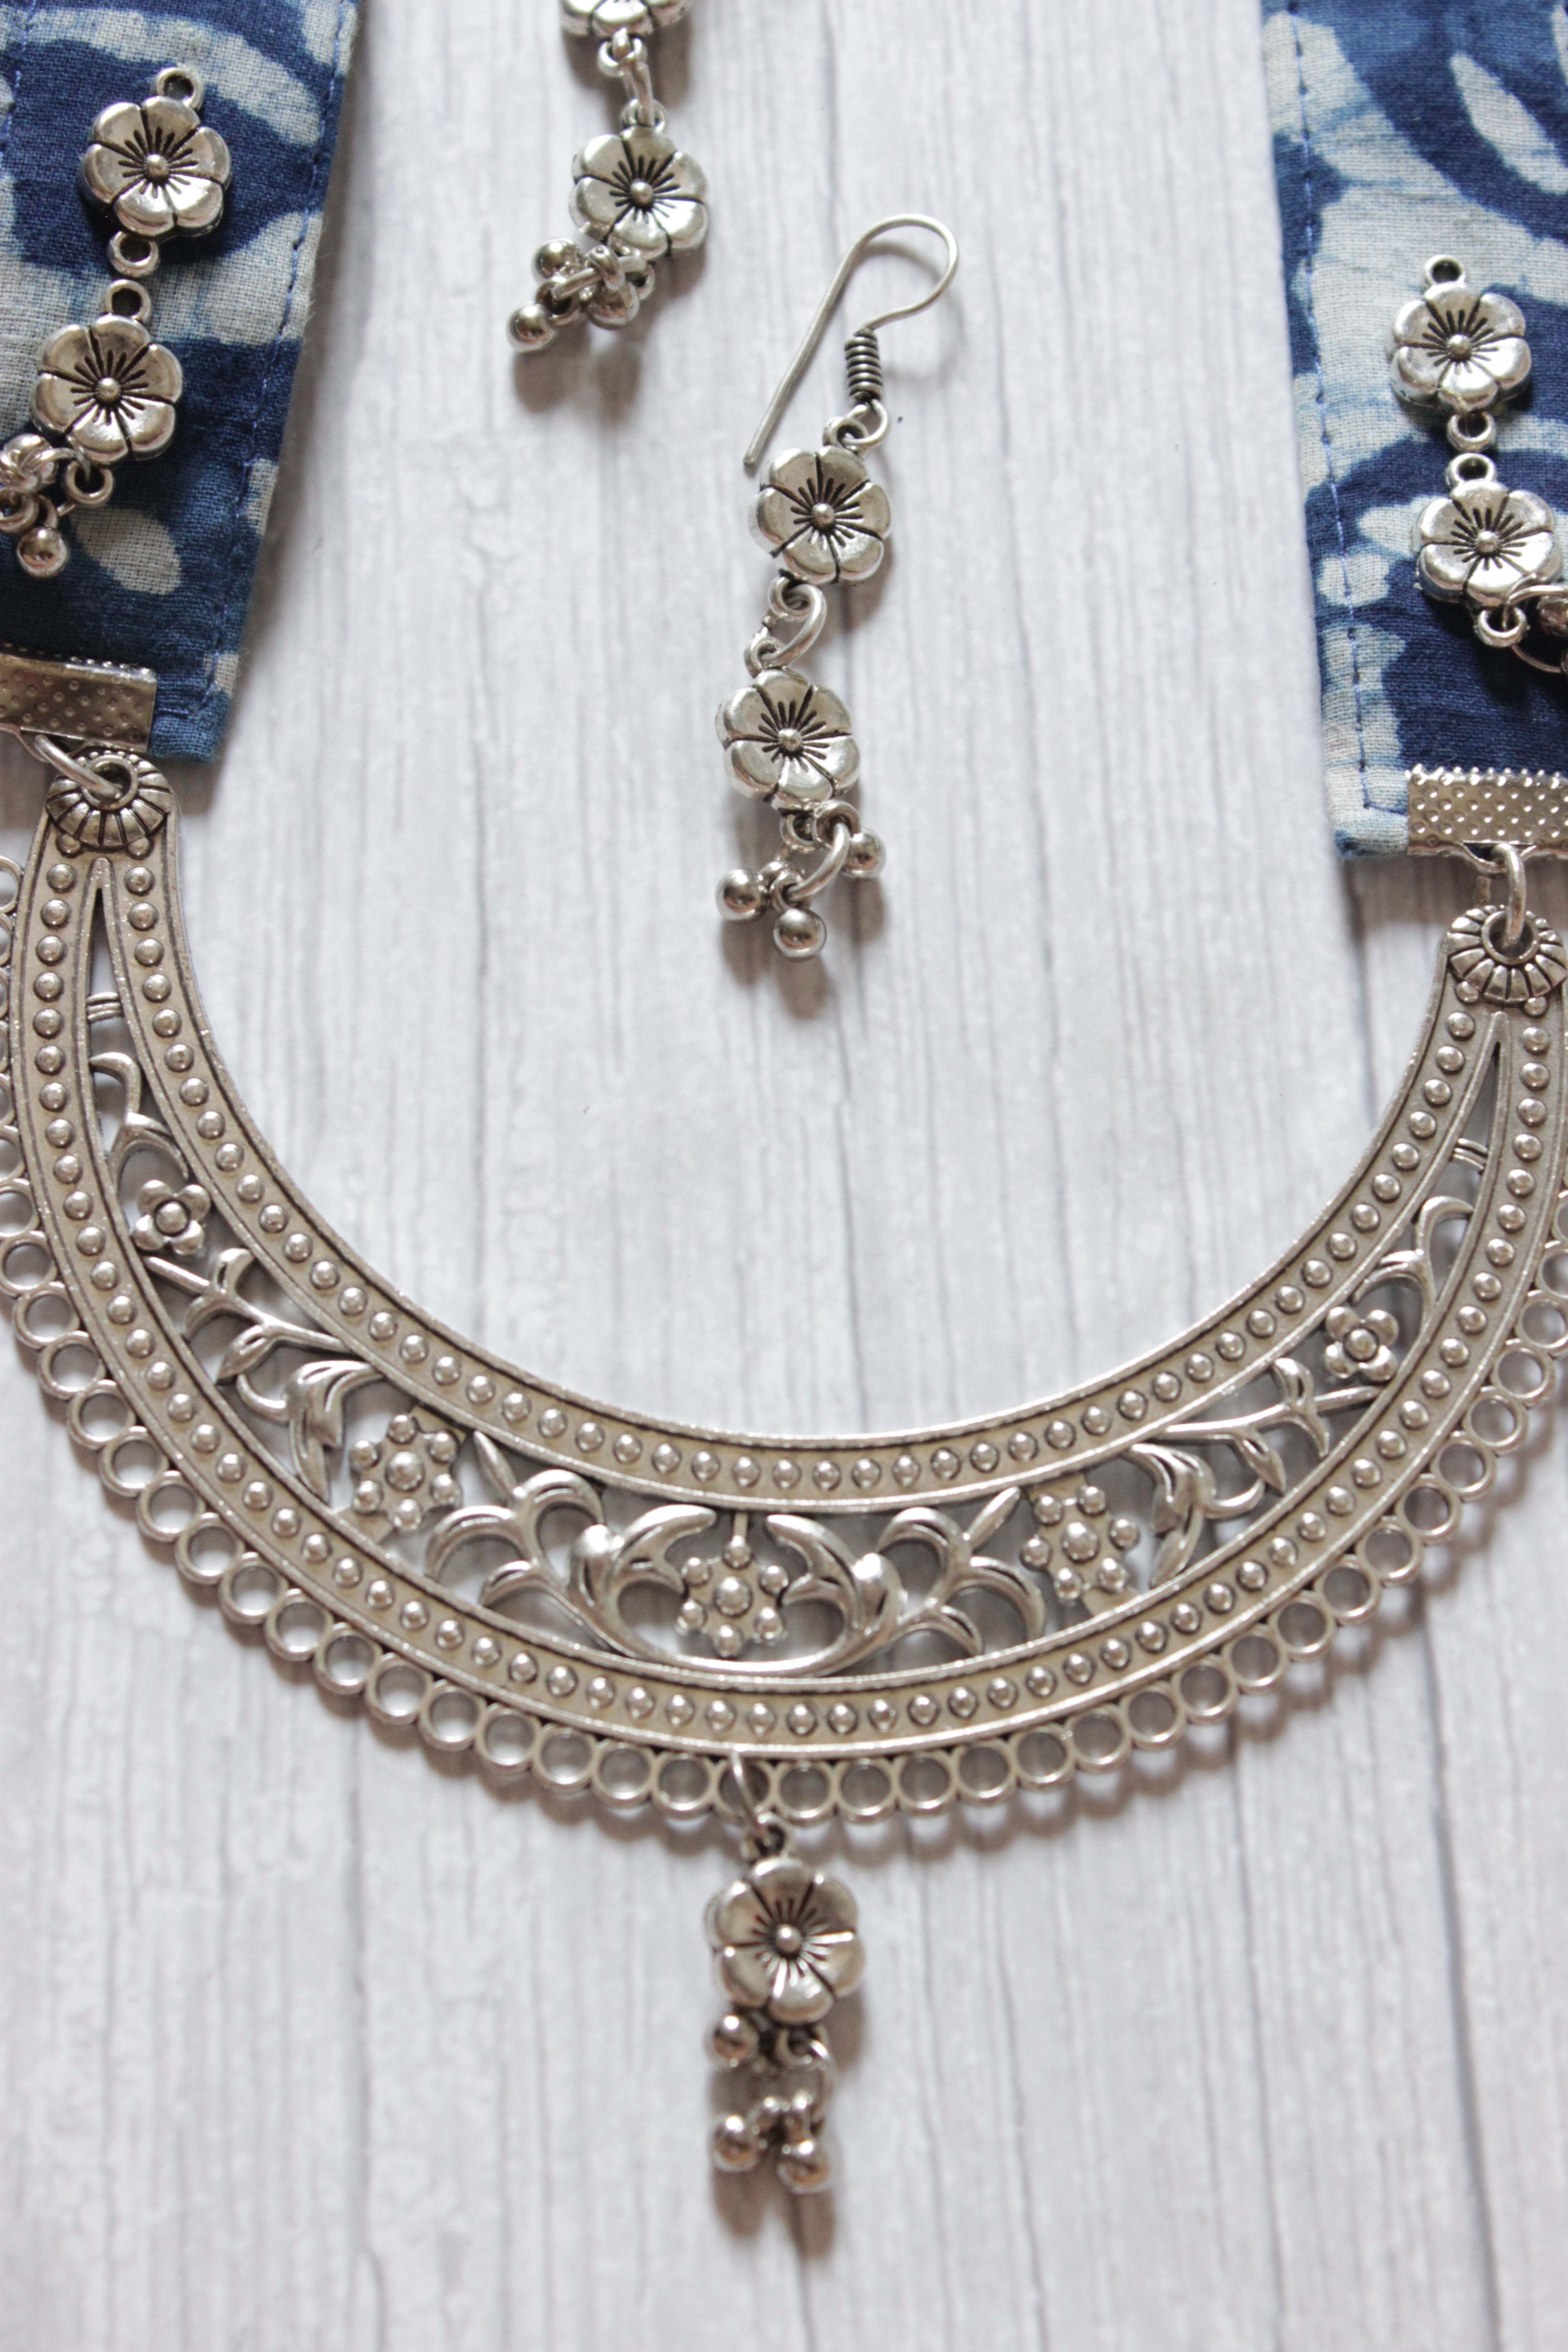 Crescent Moon Shaped Statement Pendant Collar Necklace with Indigo Fabric